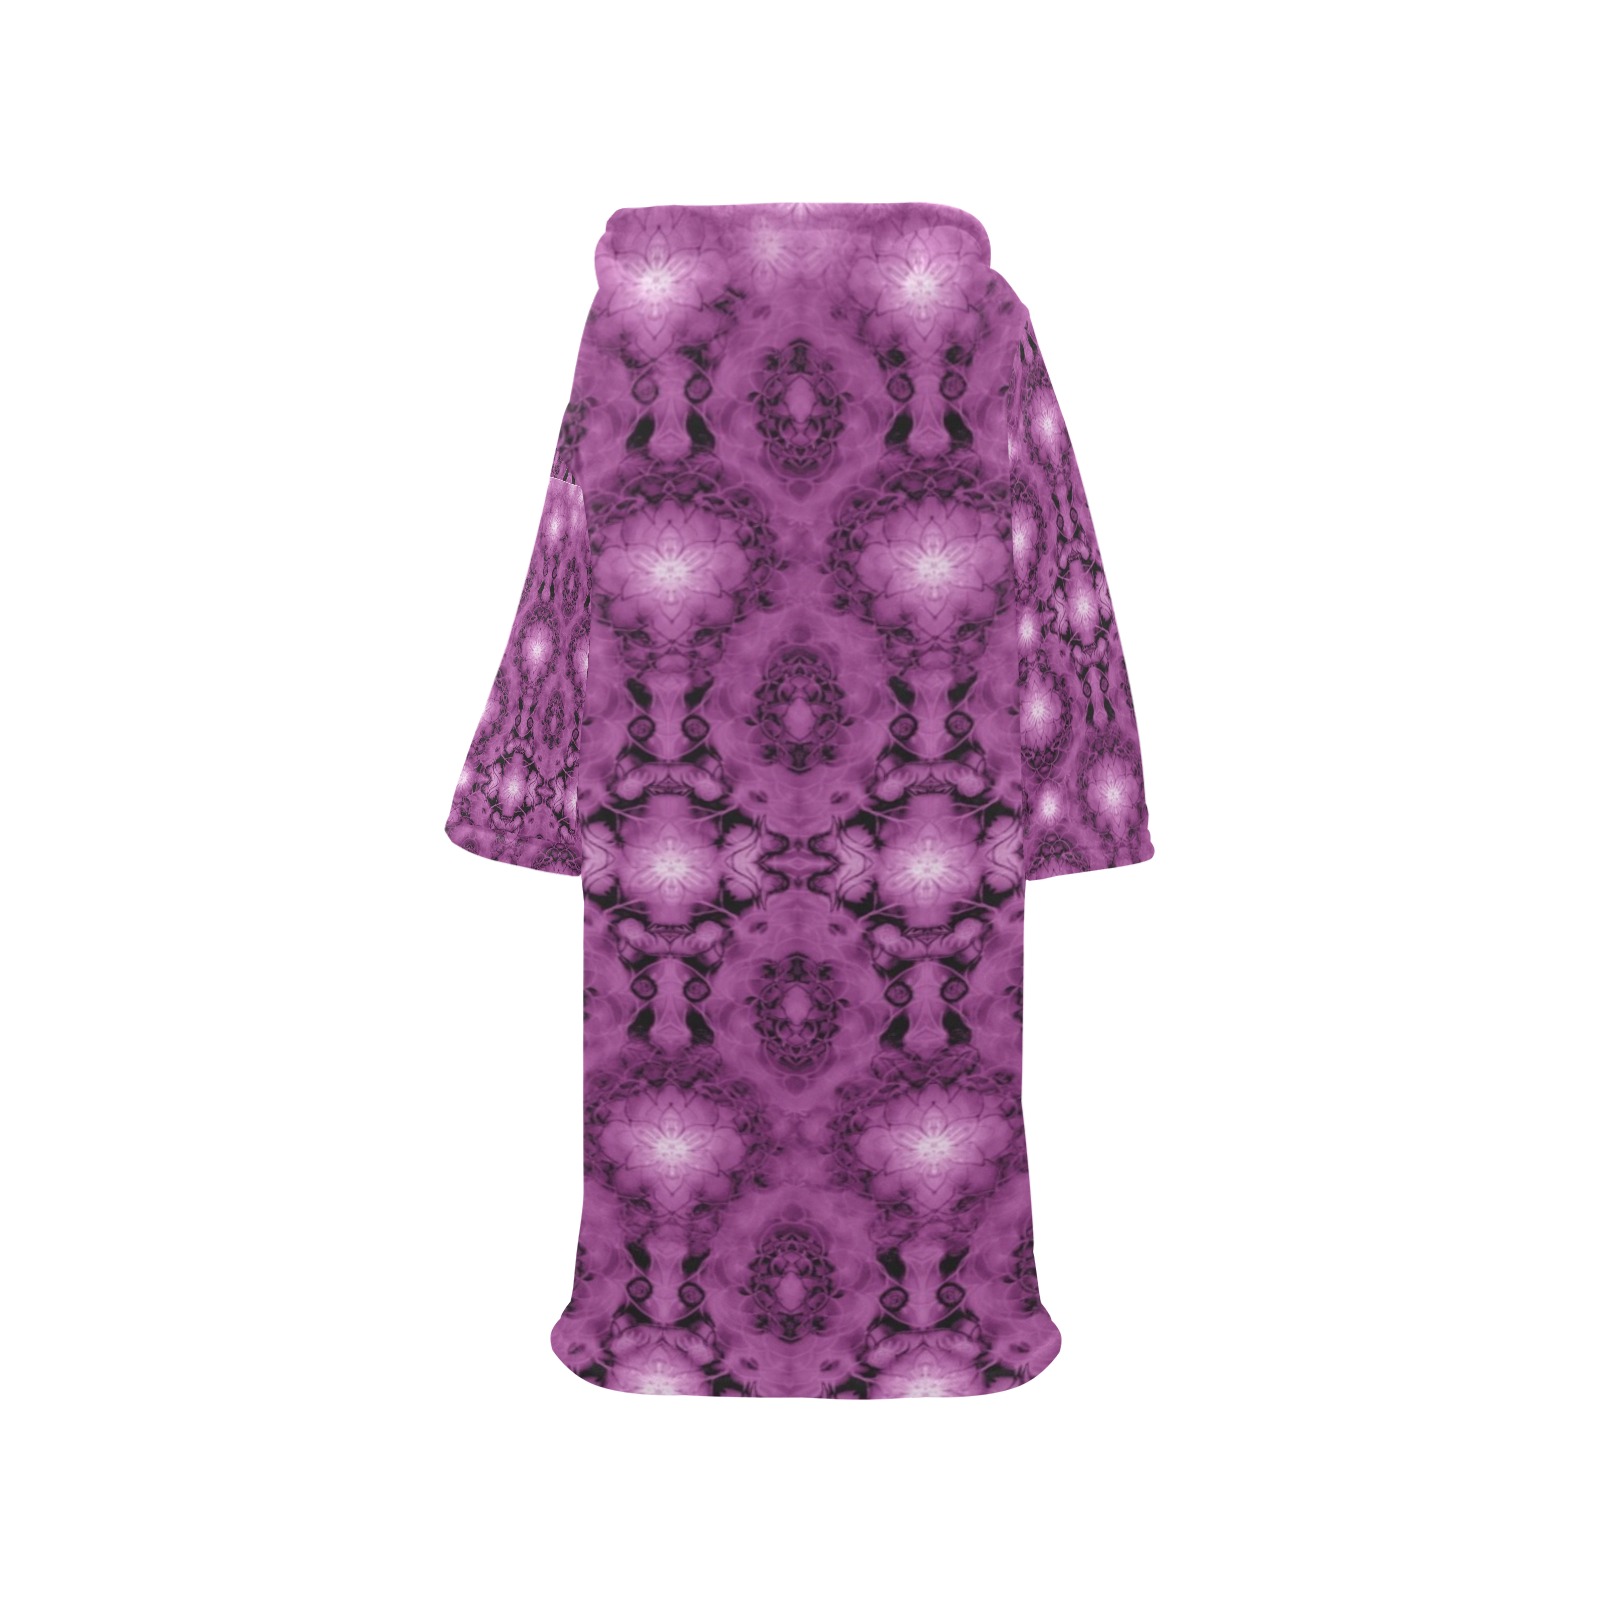 Nidhi decembre 2014-pattern 7-44x55 inches-purple Blanket Robe with Sleeves for Adults